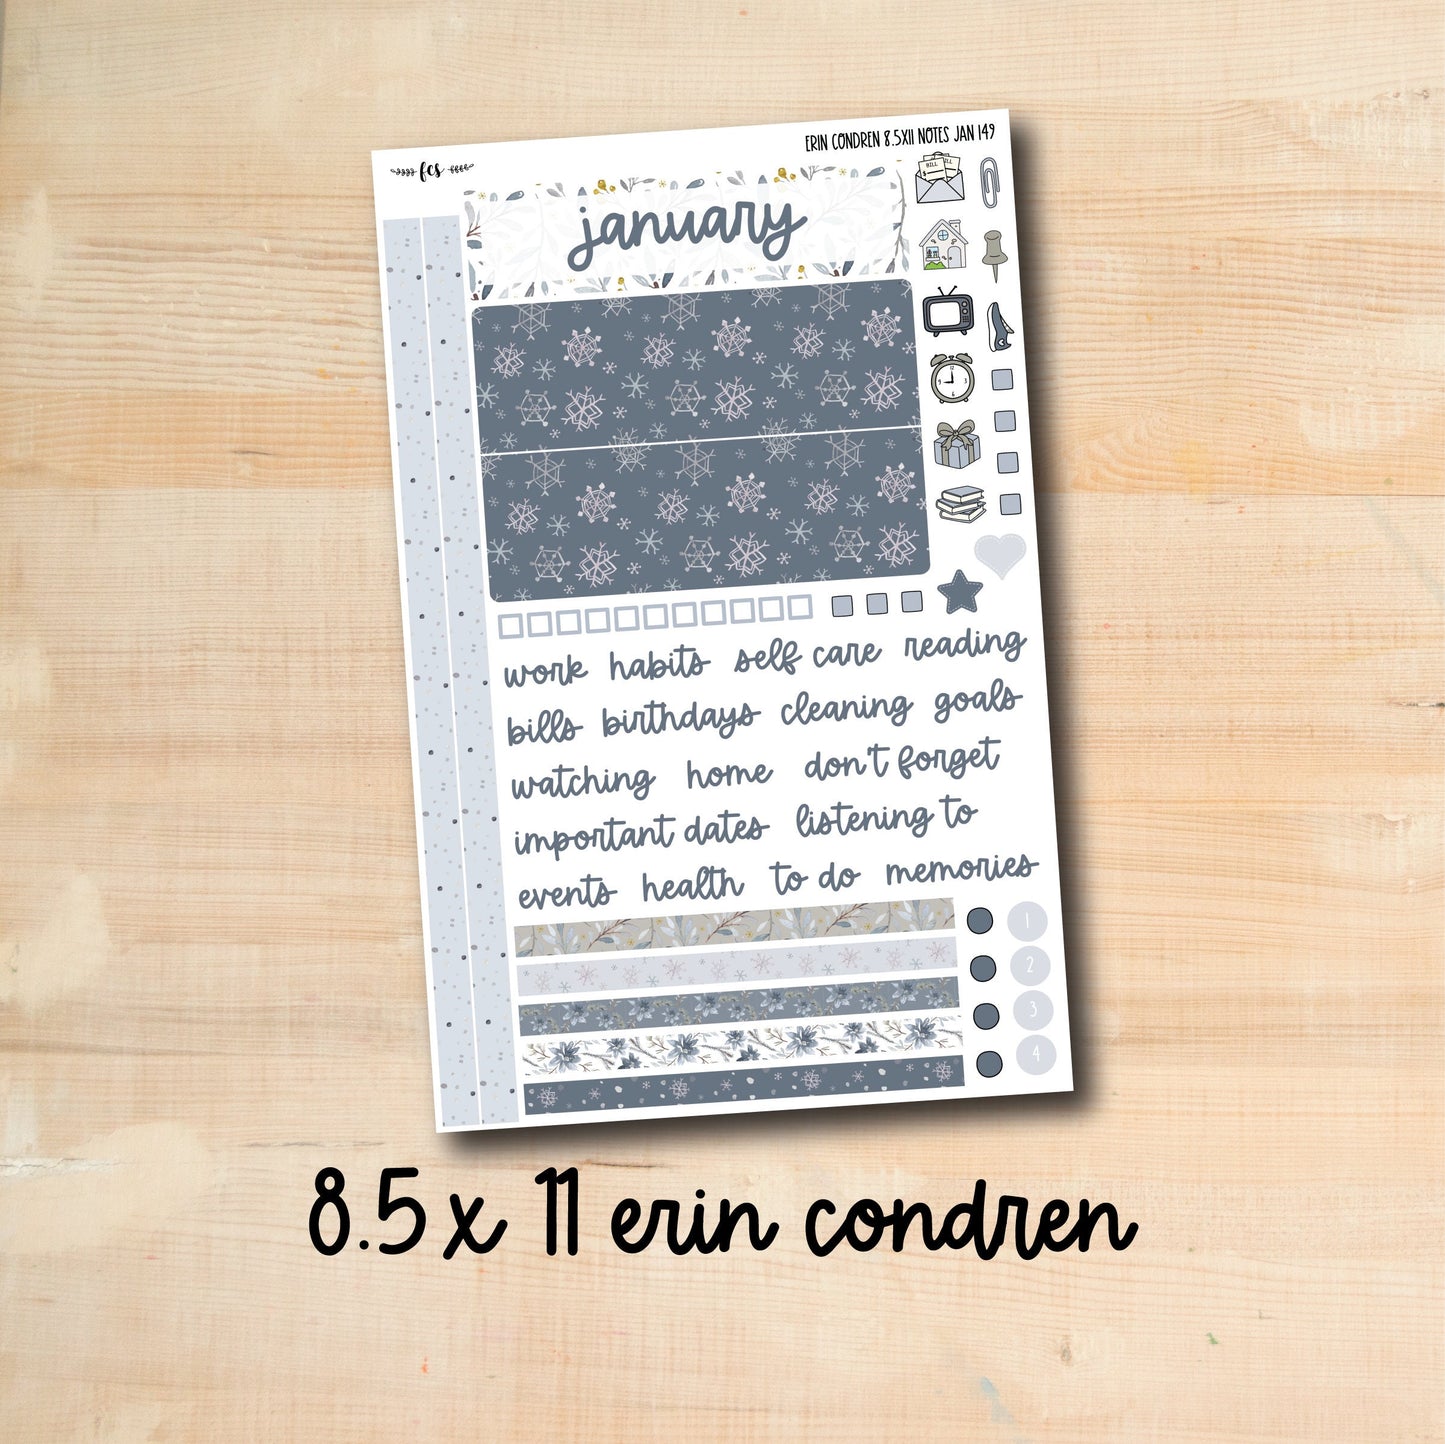 8.5x11 NOTES-JAN149 || WINTER DAYS Erin Condren 8.5x11 January notes page